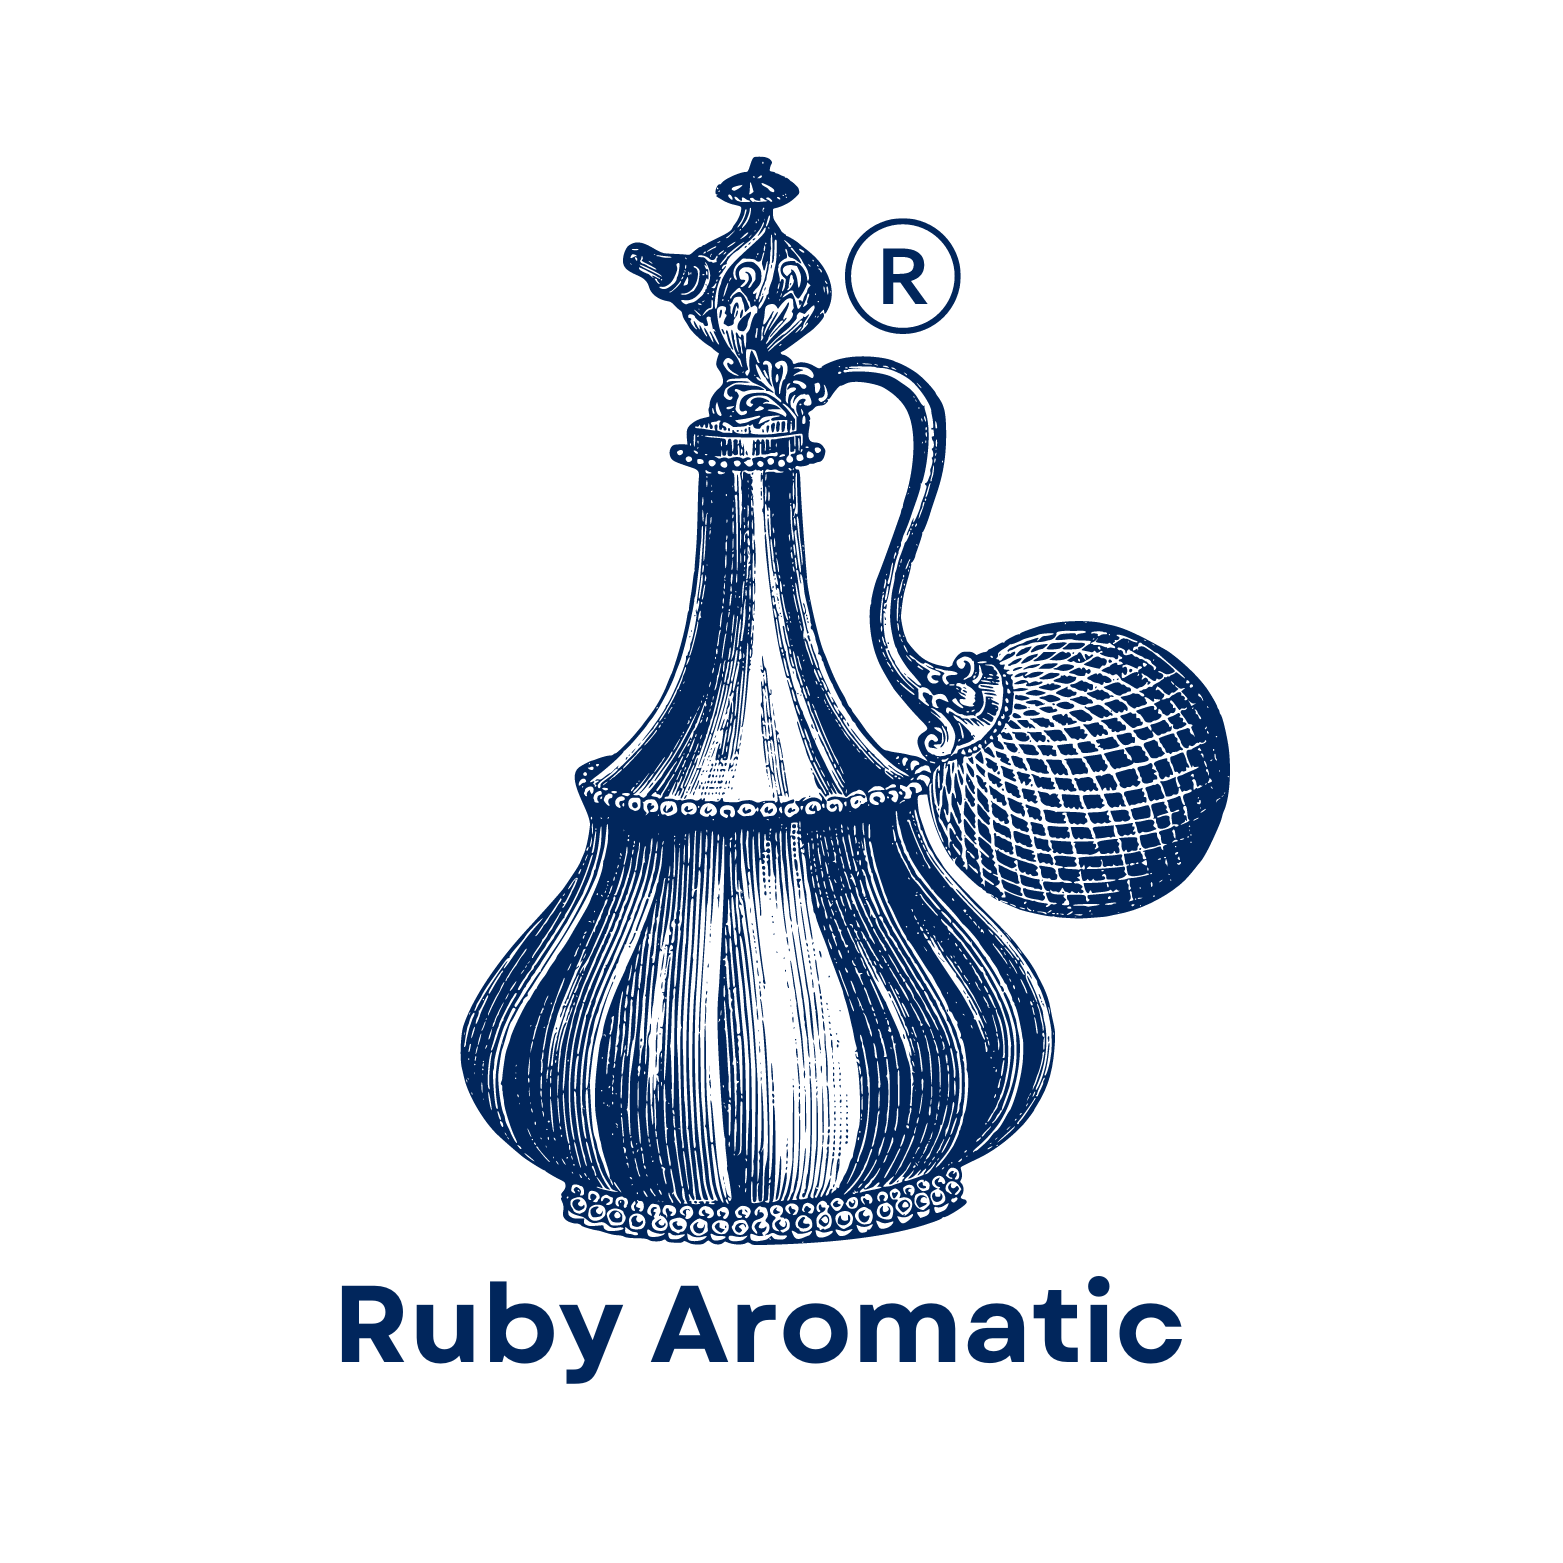 Ruby Aromatic